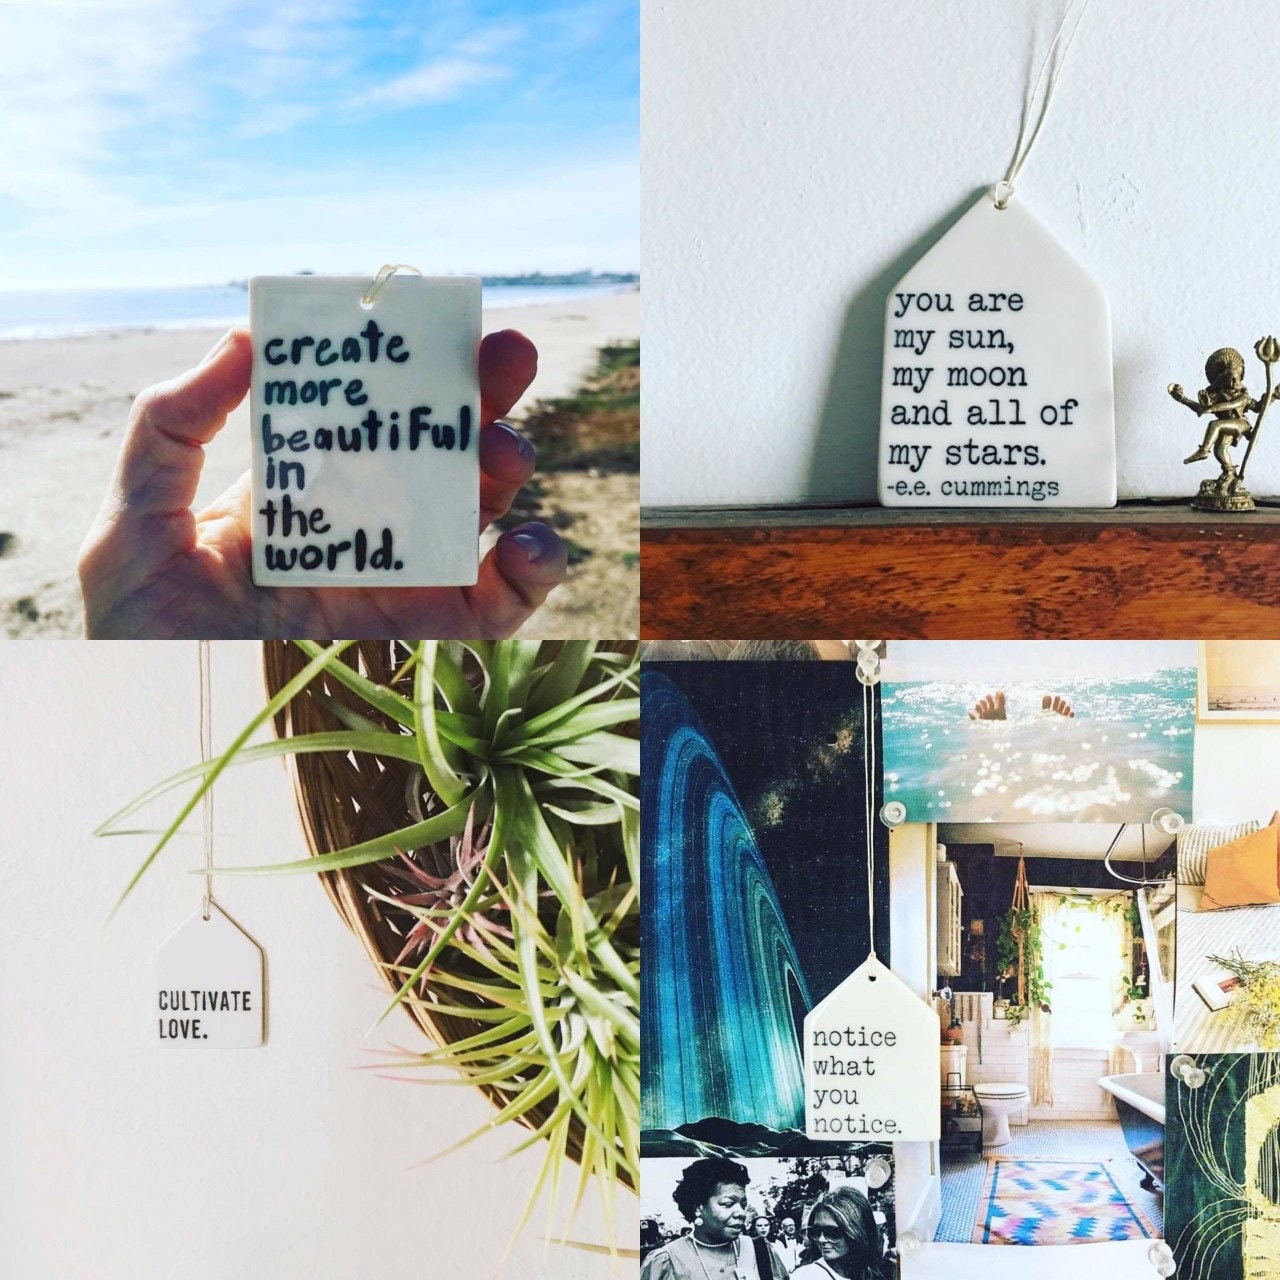 take a hike | get outside | ceramic wall tag | ceramic wall art | minimalist design | home decor | inspiration | daily reminder